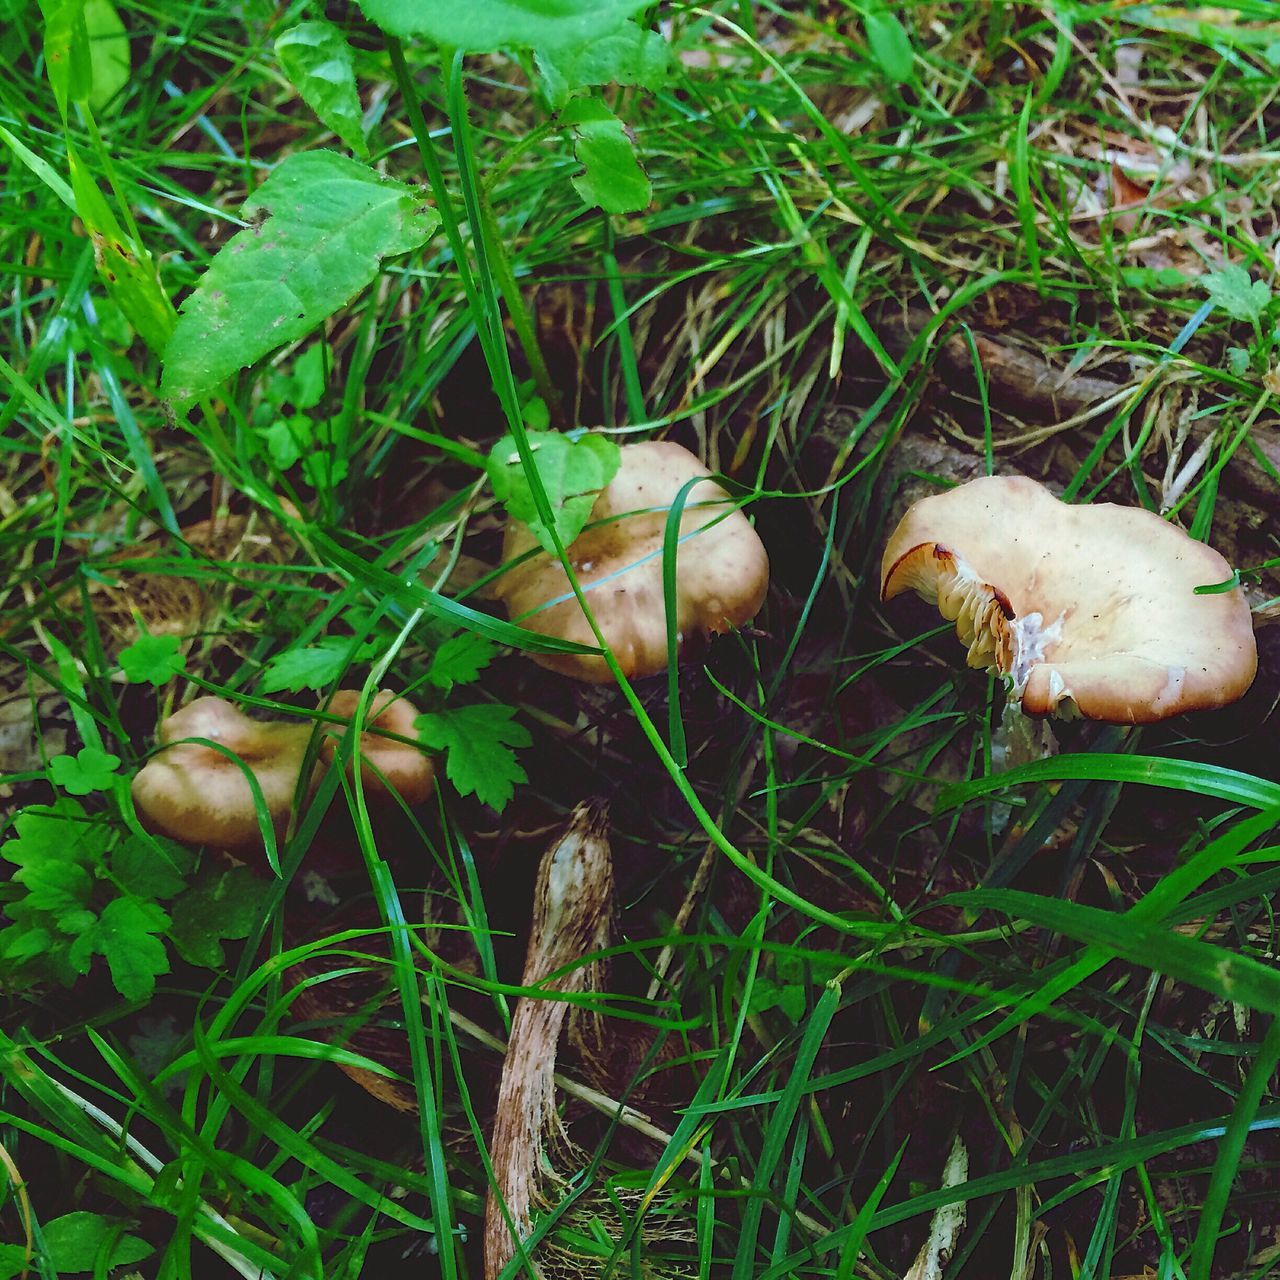 grass, mushroom, fungus, field, growth, green color, nature, toadstool, grassy, close-up, high angle view, freshness, edible mushroom, beauty in nature, day, vegetable, uncultivated, outdoors, no people, plant